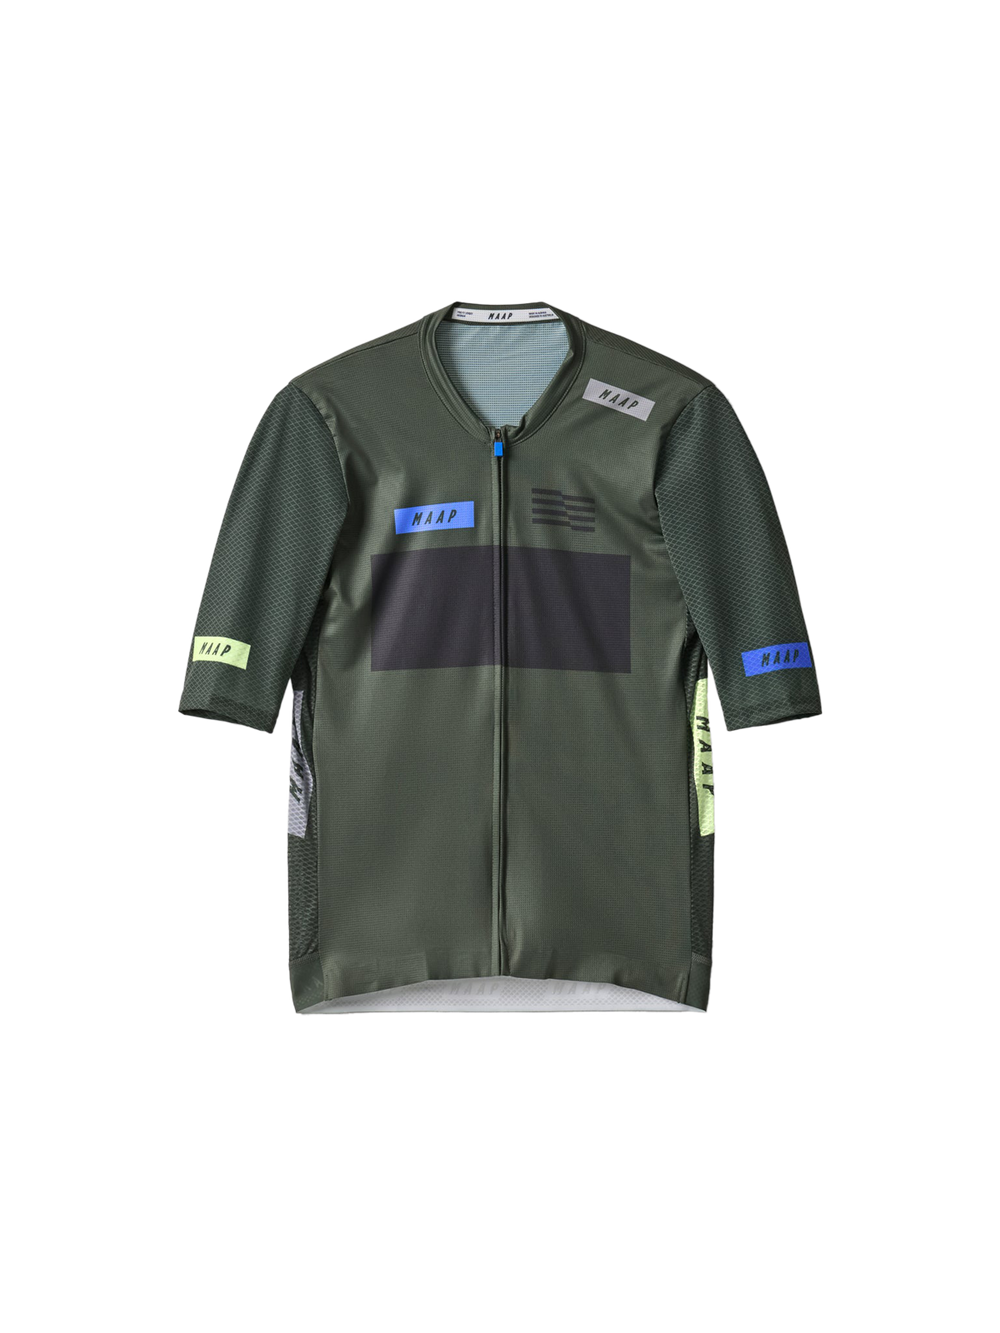 Product Image for System Pro Air Jersey